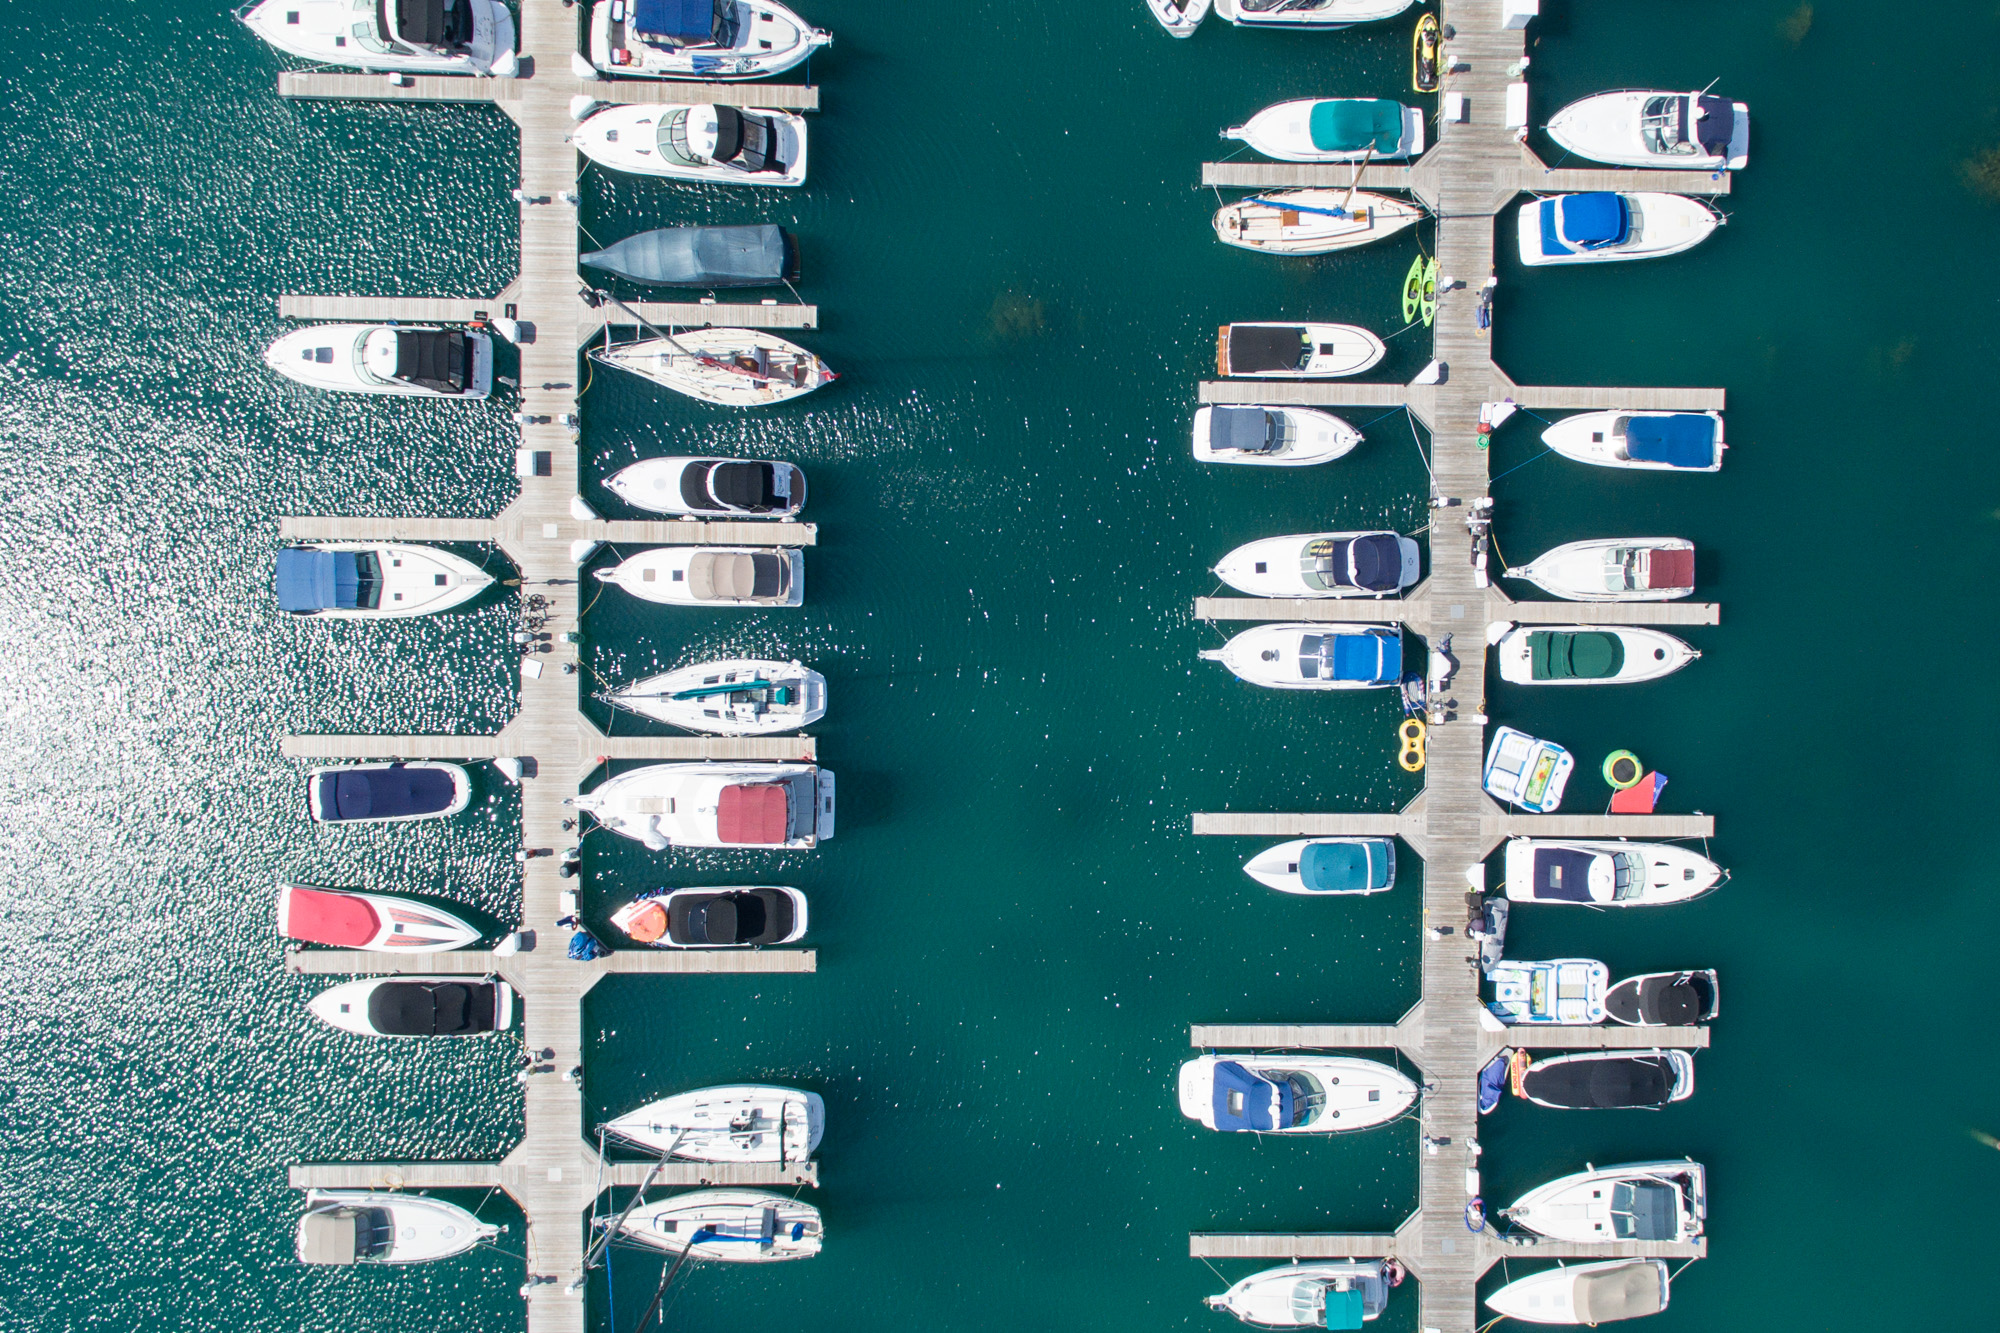 NMMA releases 2022 Total Boat Registrations report